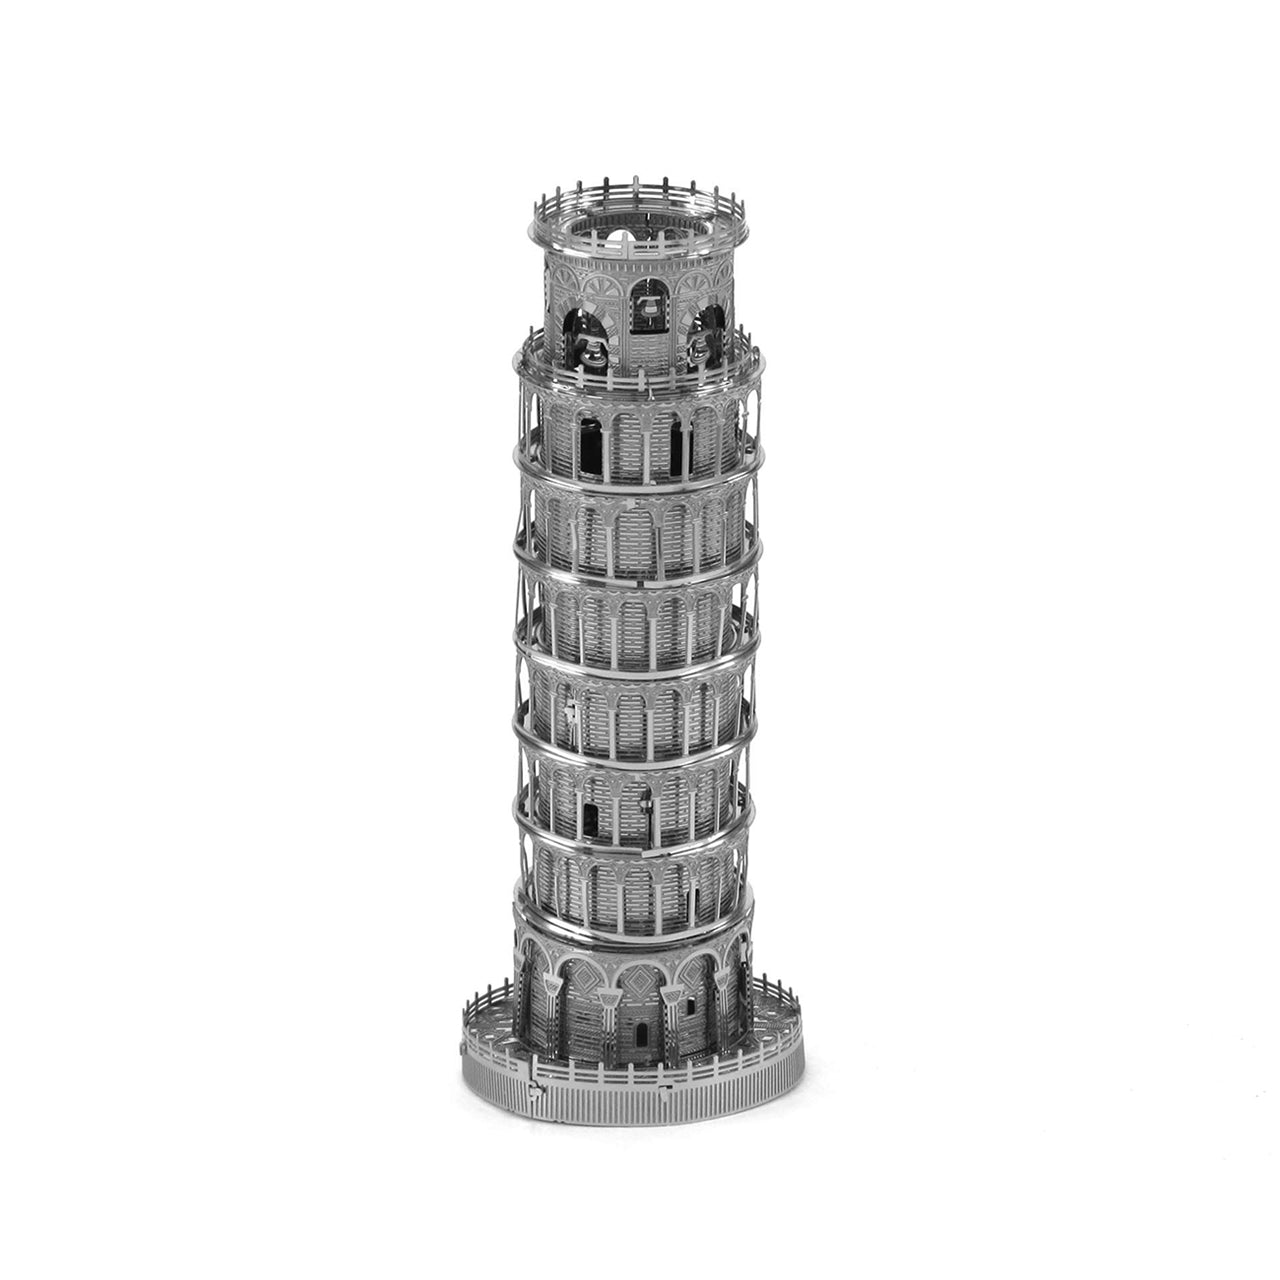 ICX015 Leaning Tower of Pisa (Buildable) 